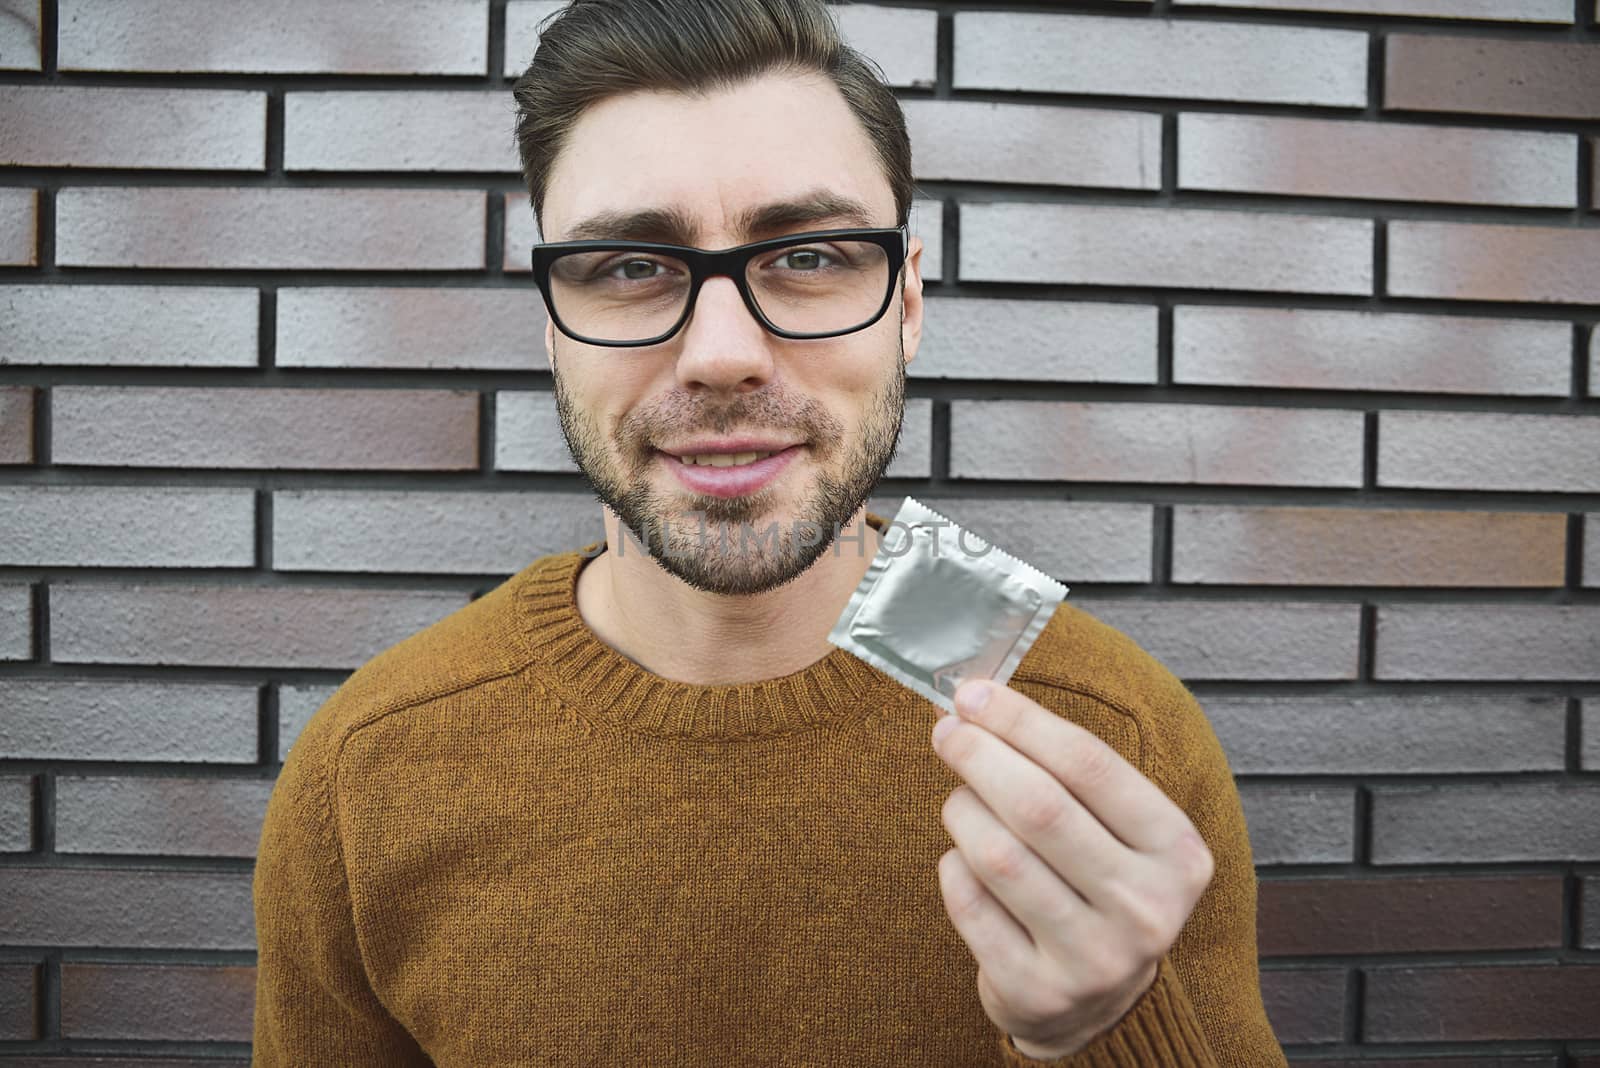 Male youngster with appealing look, holds condom.